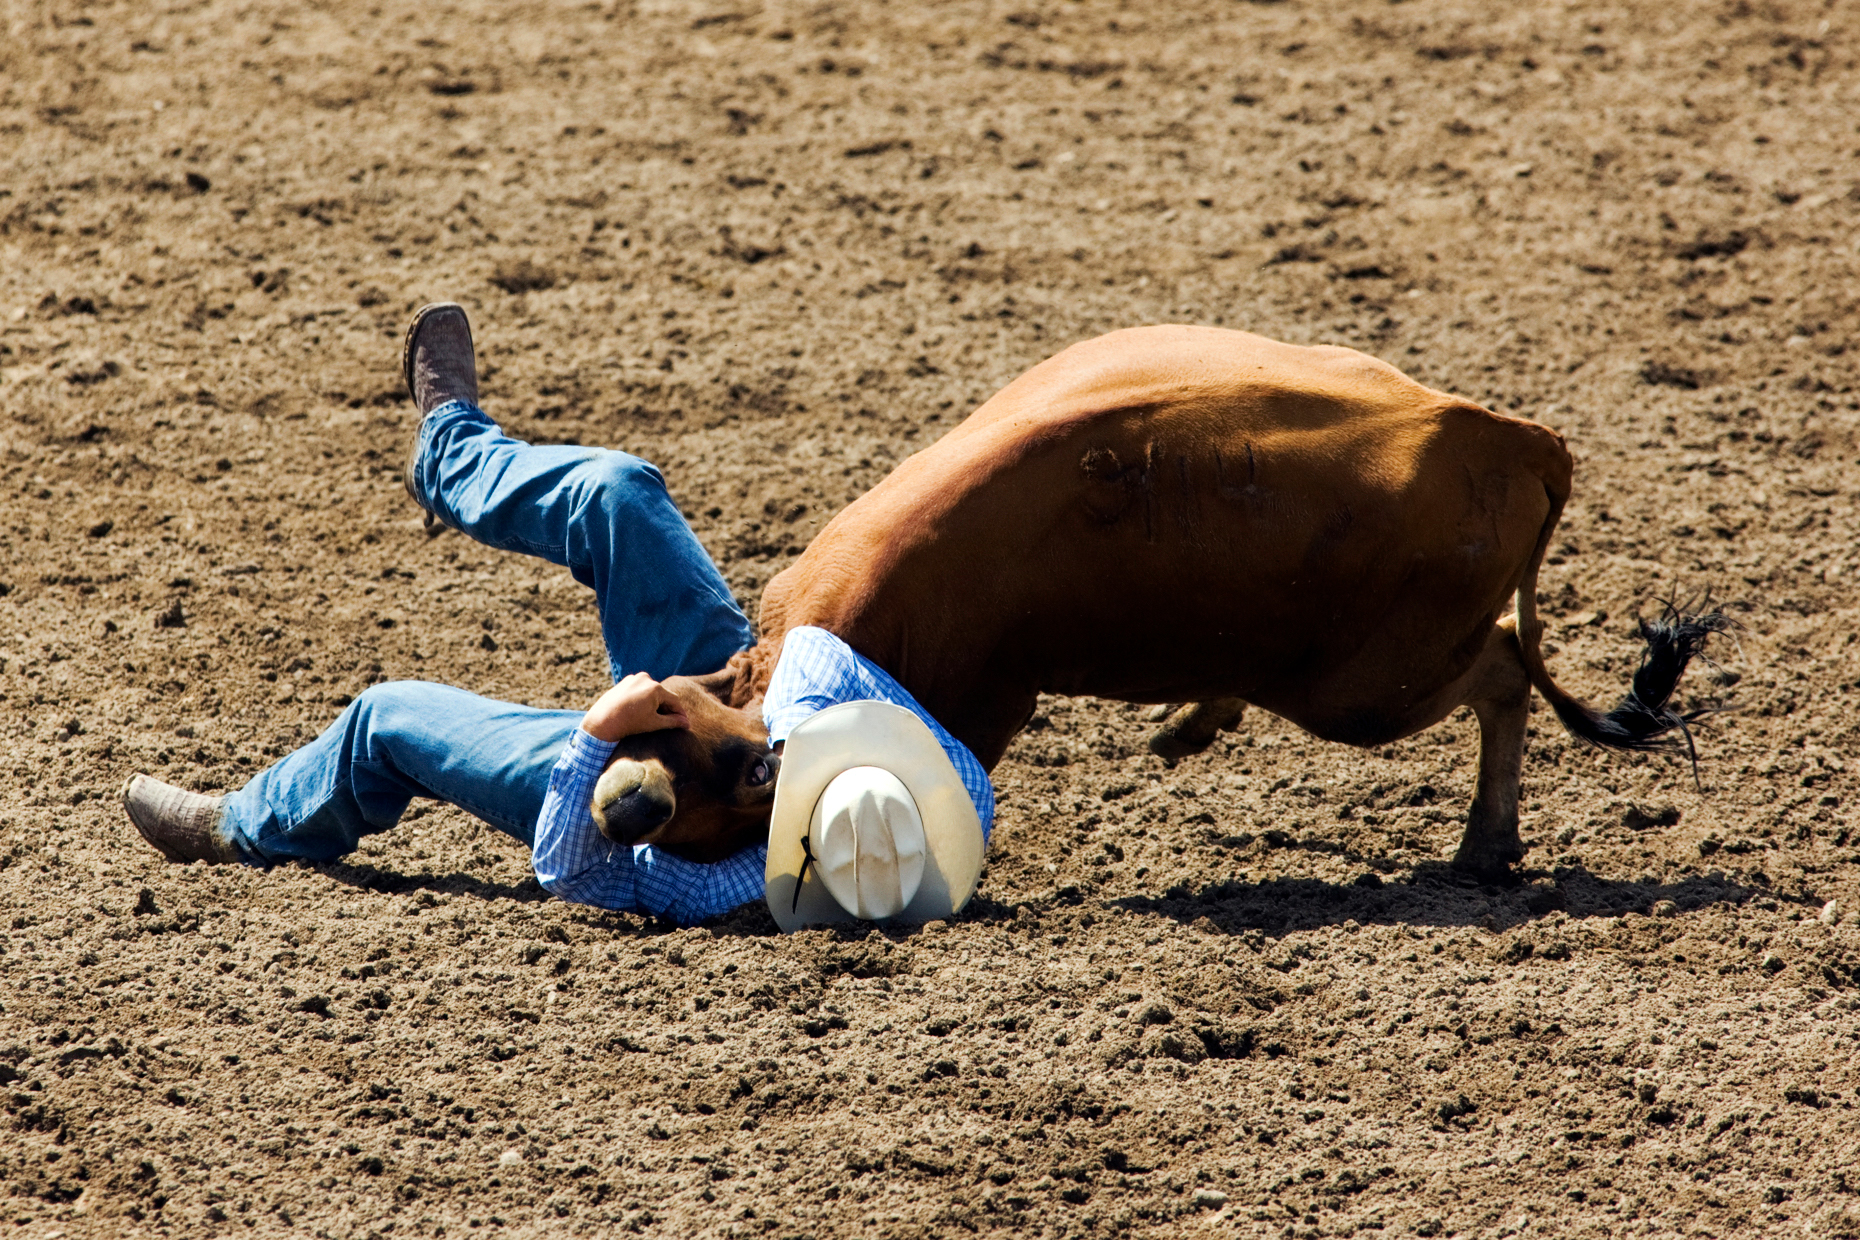 Cowboy competing in the steer wrestling event, Chaffee County Fair & Rodeo